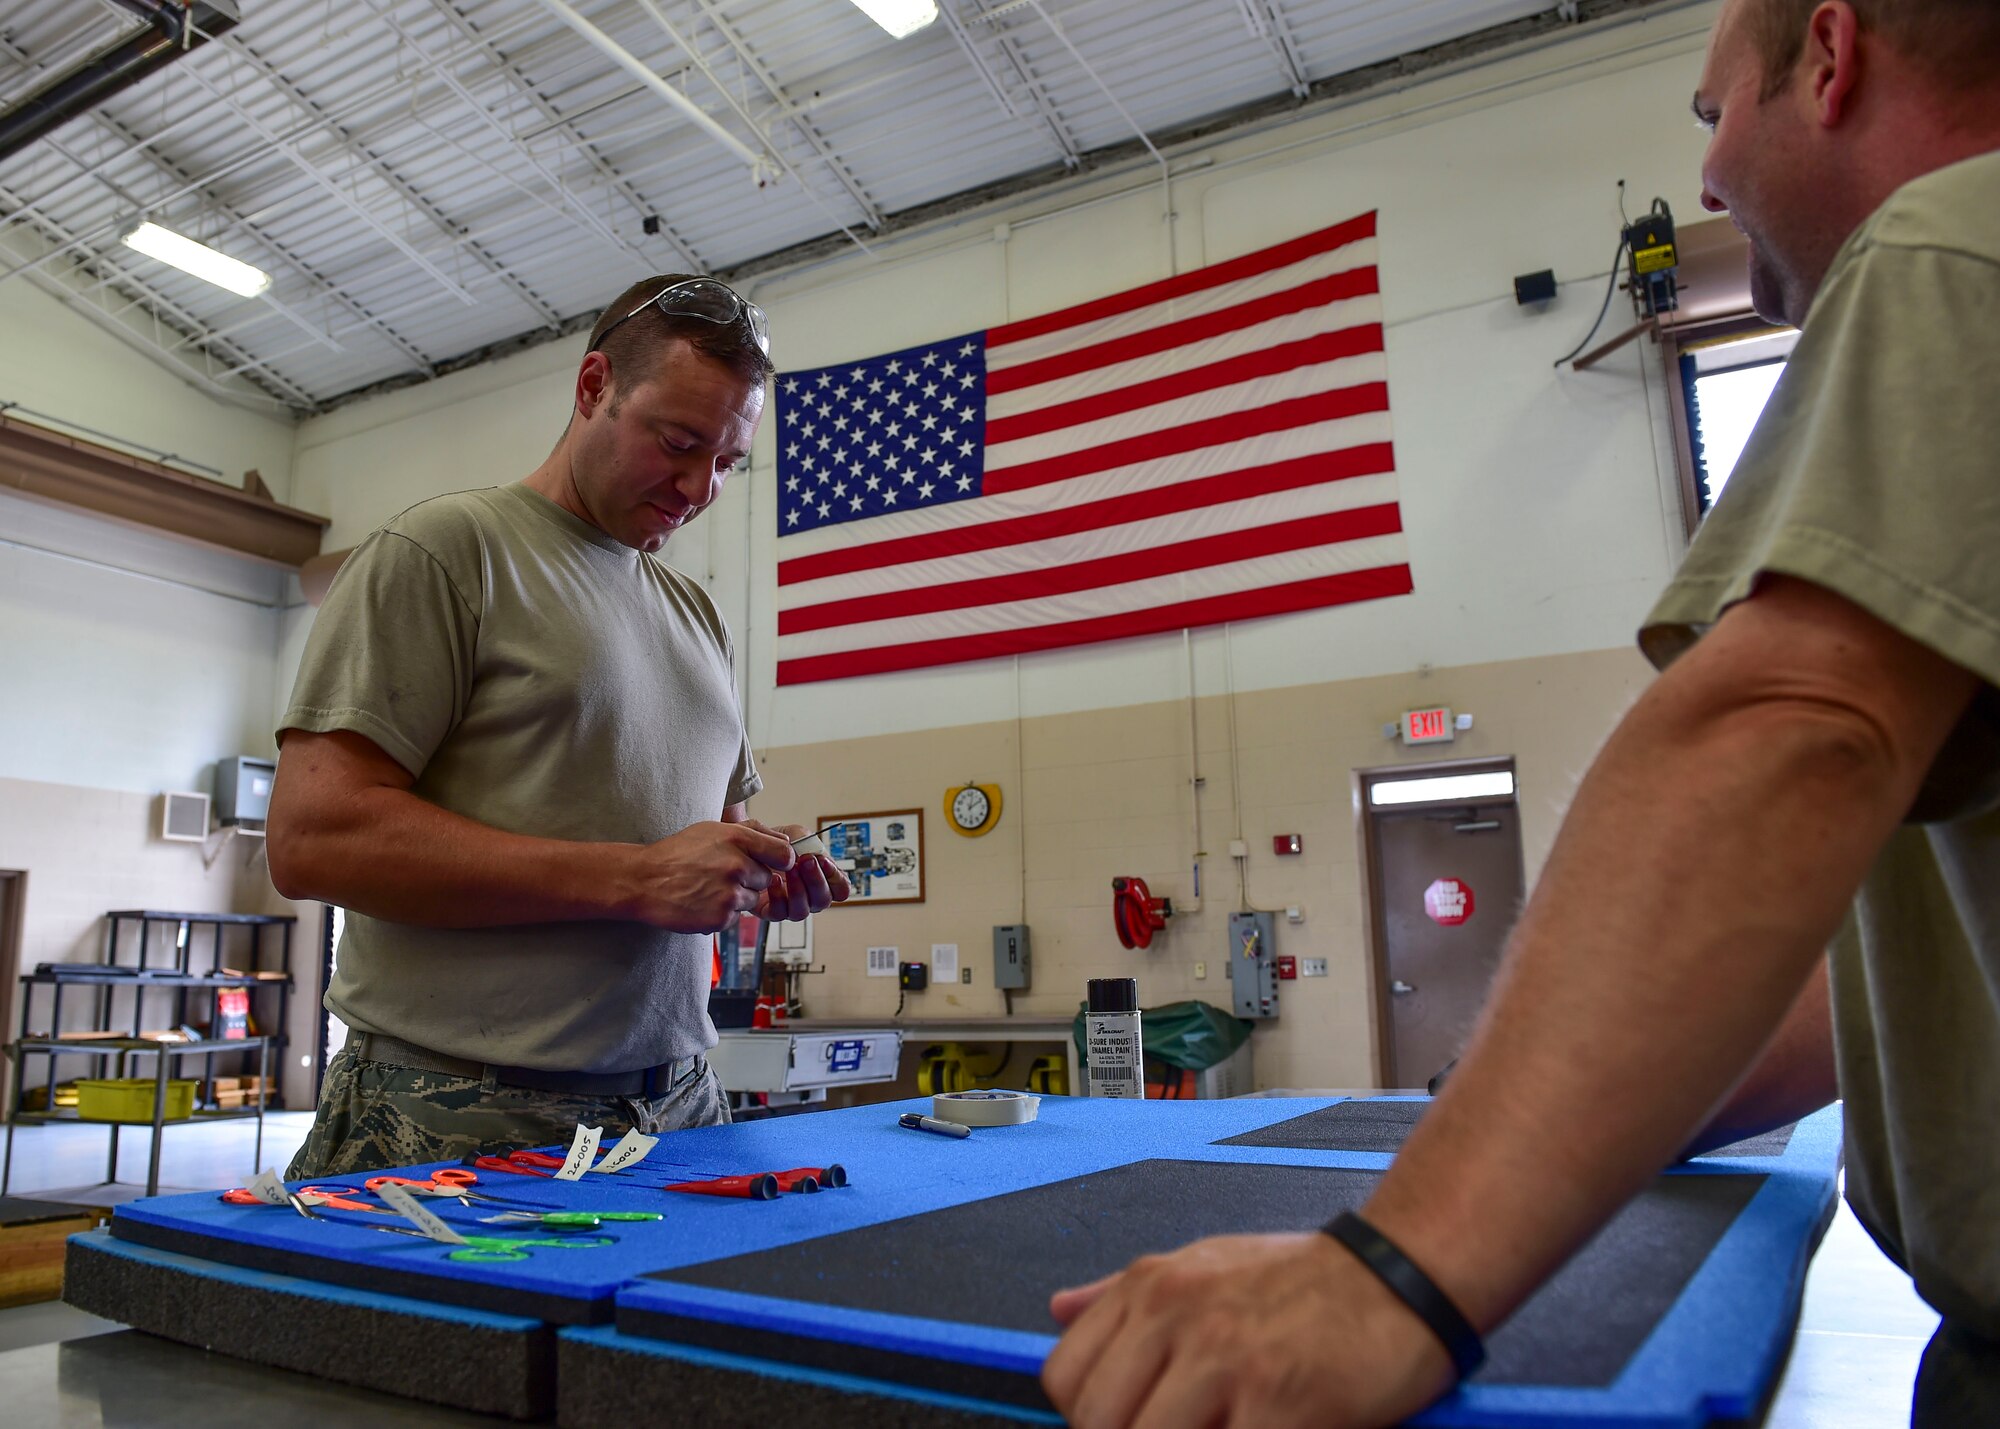 Master Sgt. James Johnson and Tech. Sgt. Jeff Burgess, aerospace propulsion technicians from the 910th Maintenance Squadron here, build and inventory a new tool kit, July 6, 2017. Keeping an organized work station and accurate inventory reduces the likelihood of a spare tool being left somewhere it could do major damage to the aircraft. Every job has an impact. (U.S. Air Force Photo/Senior Airman Jeffrey Grossi)